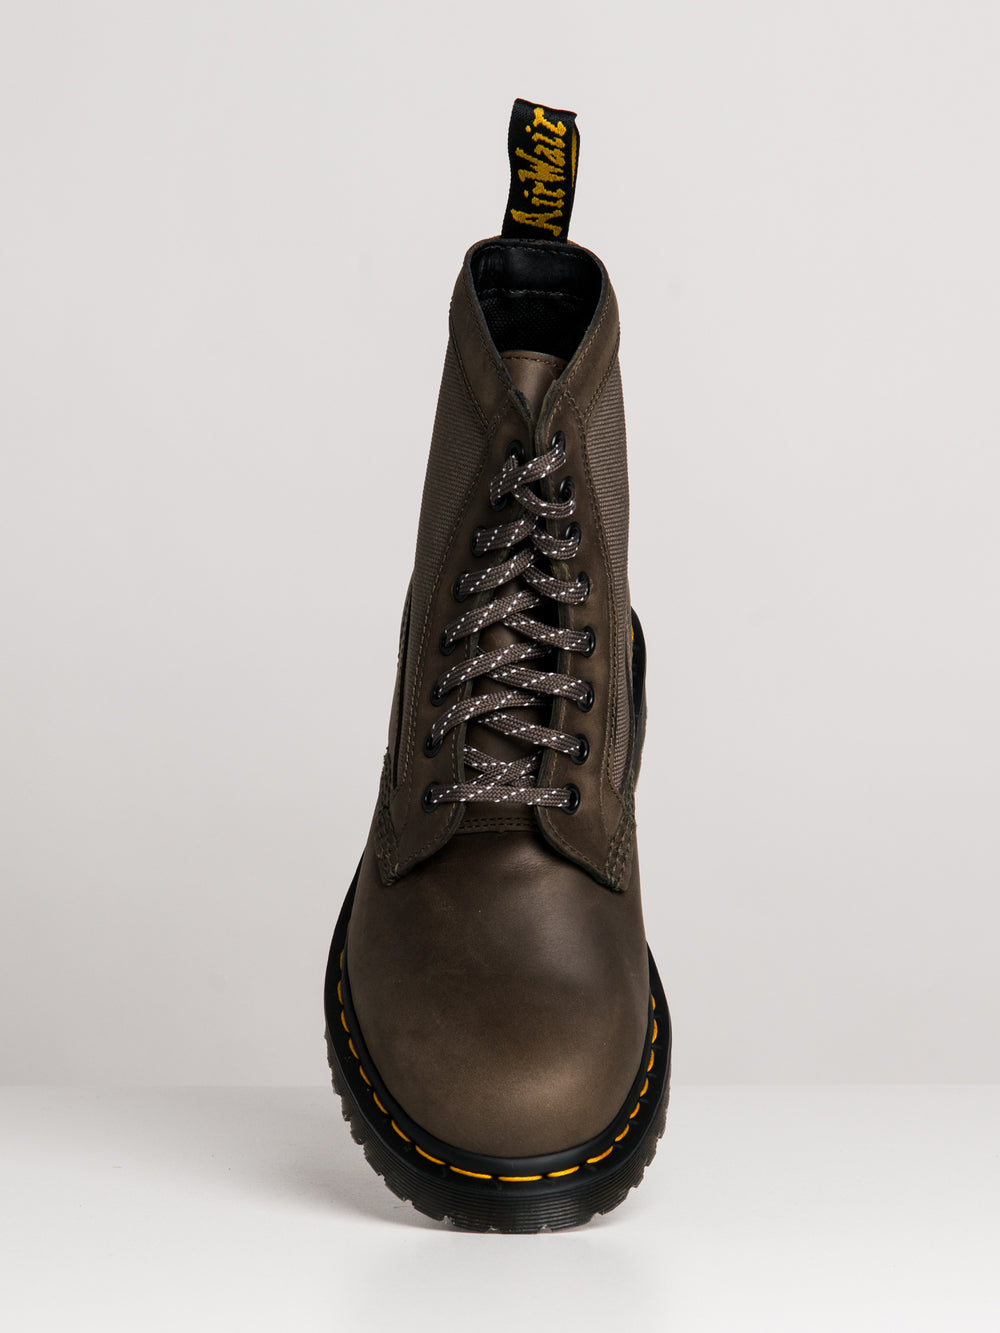 MENS DR MARTENS 1460 PANEL STREETER BOOT - CLEARANCE